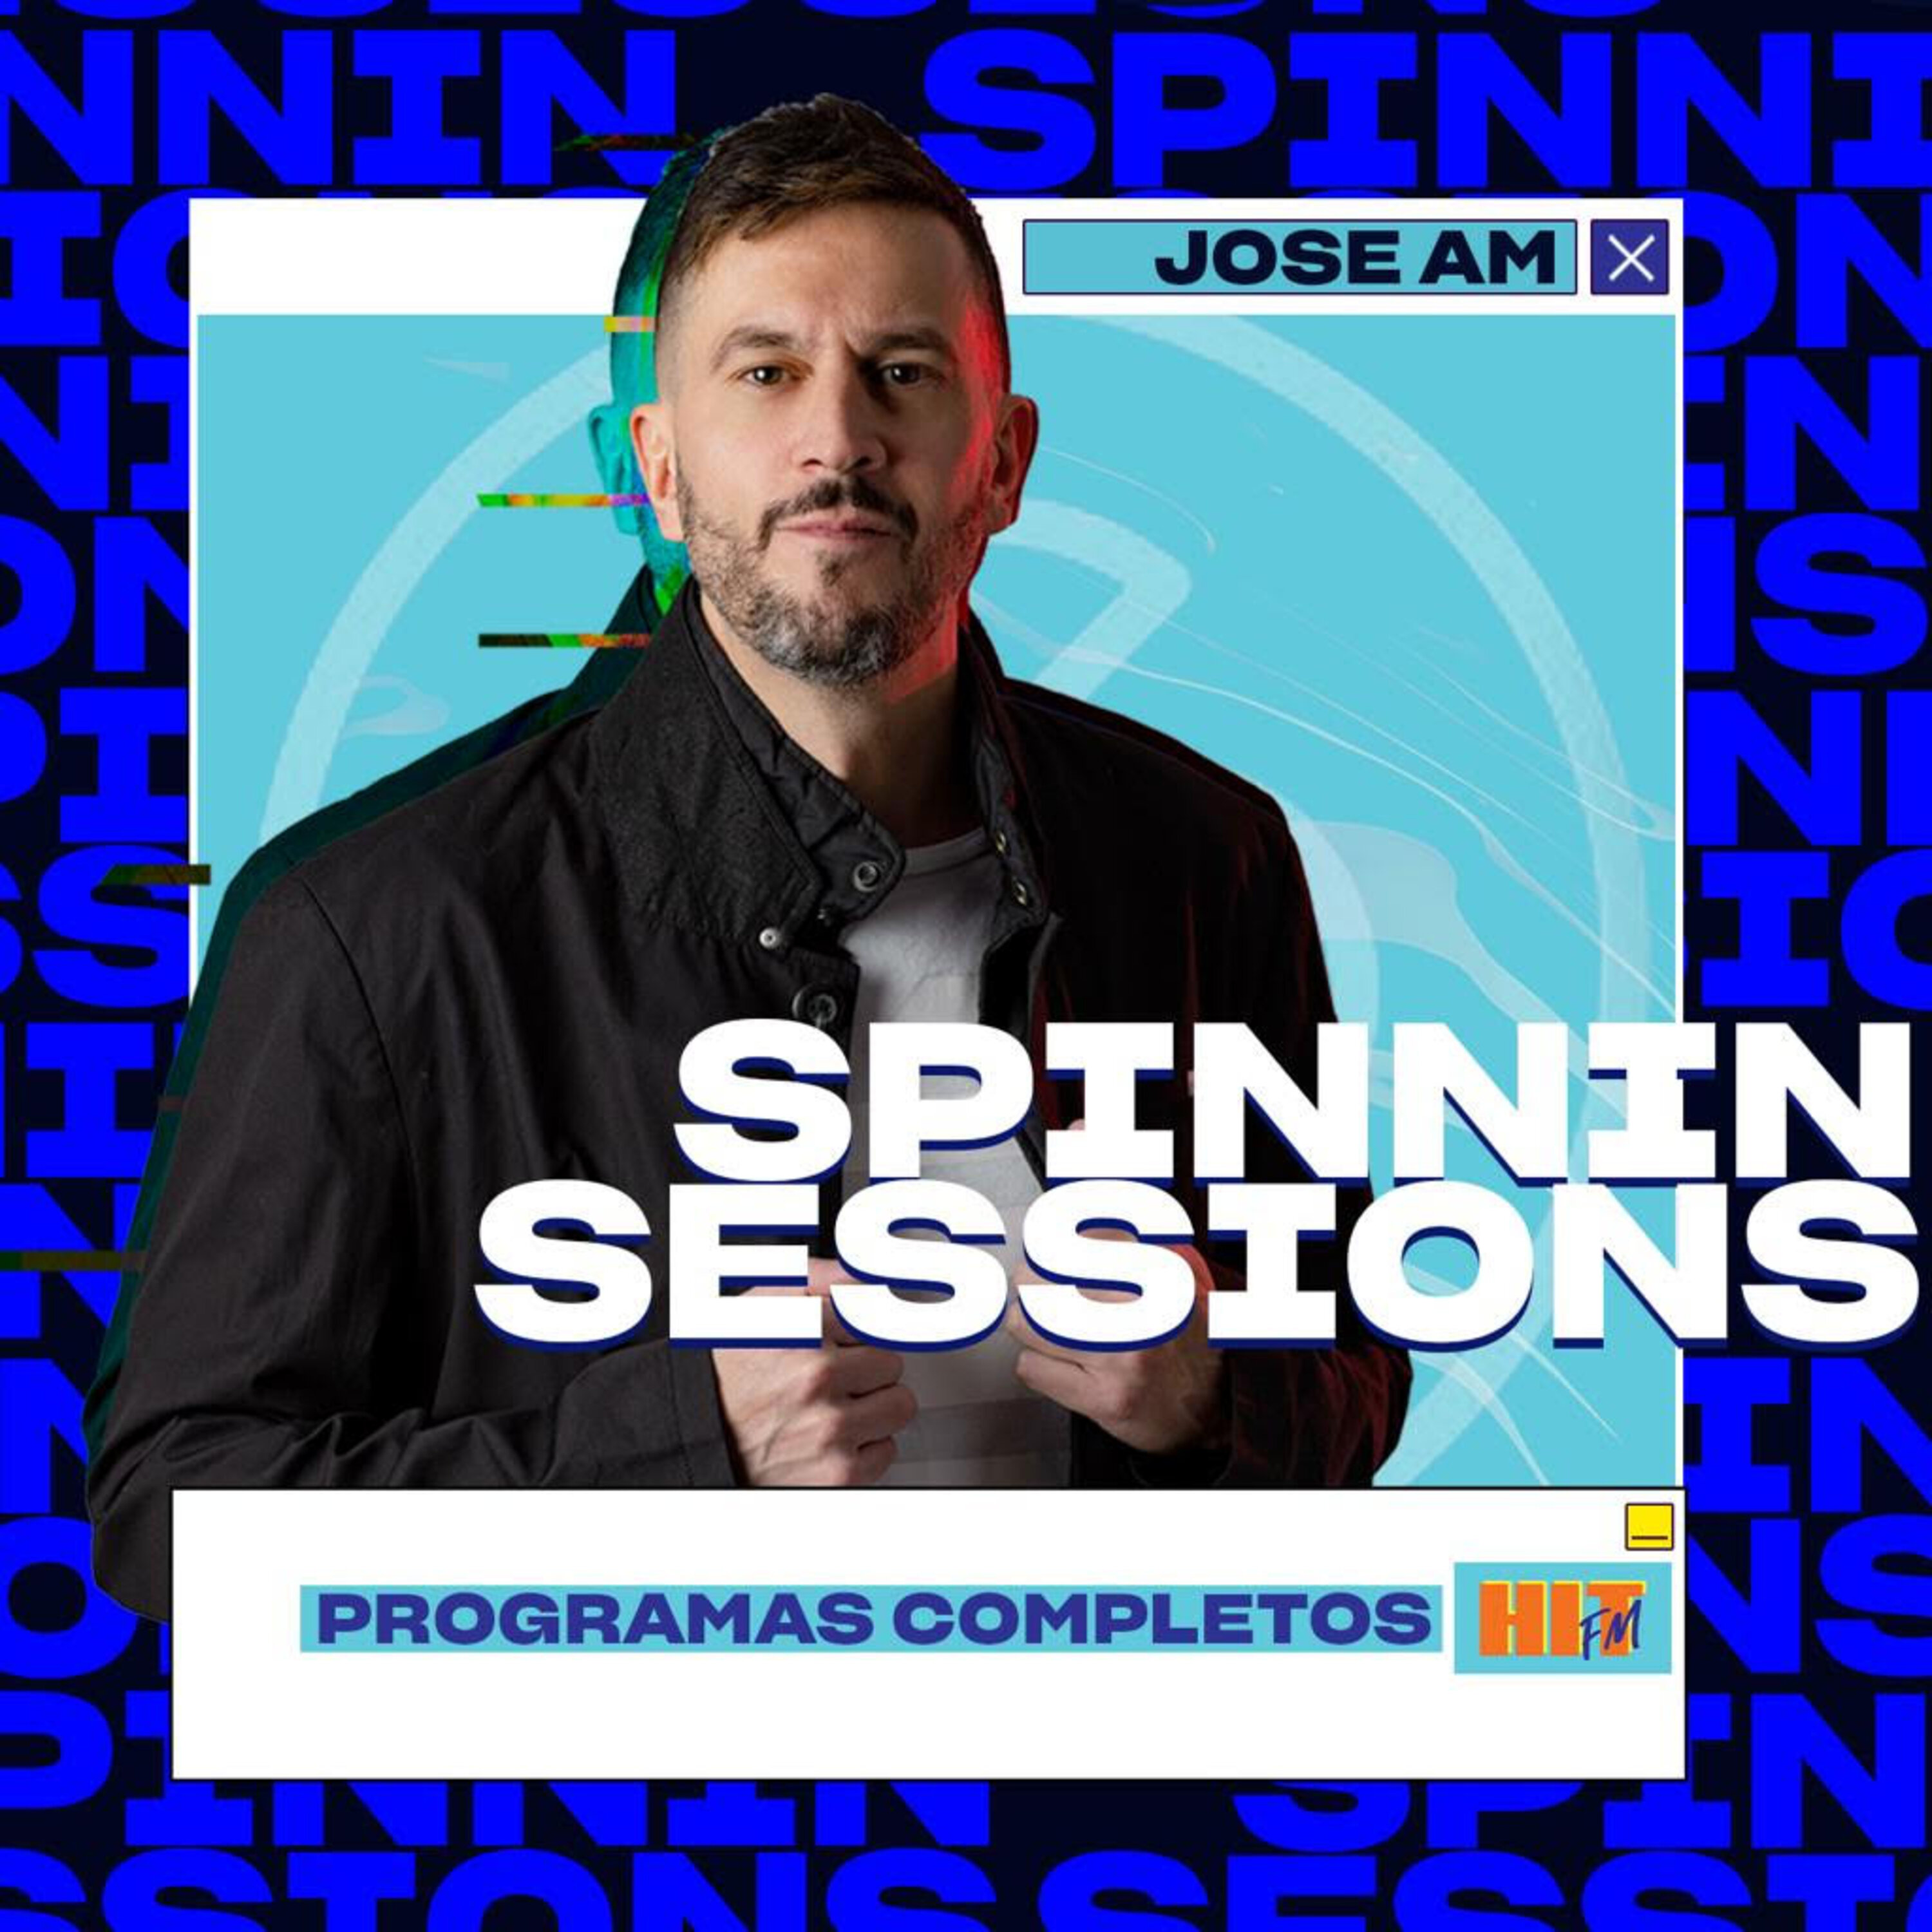 Spinnin Sessions con Jose AM (10/07/2022)